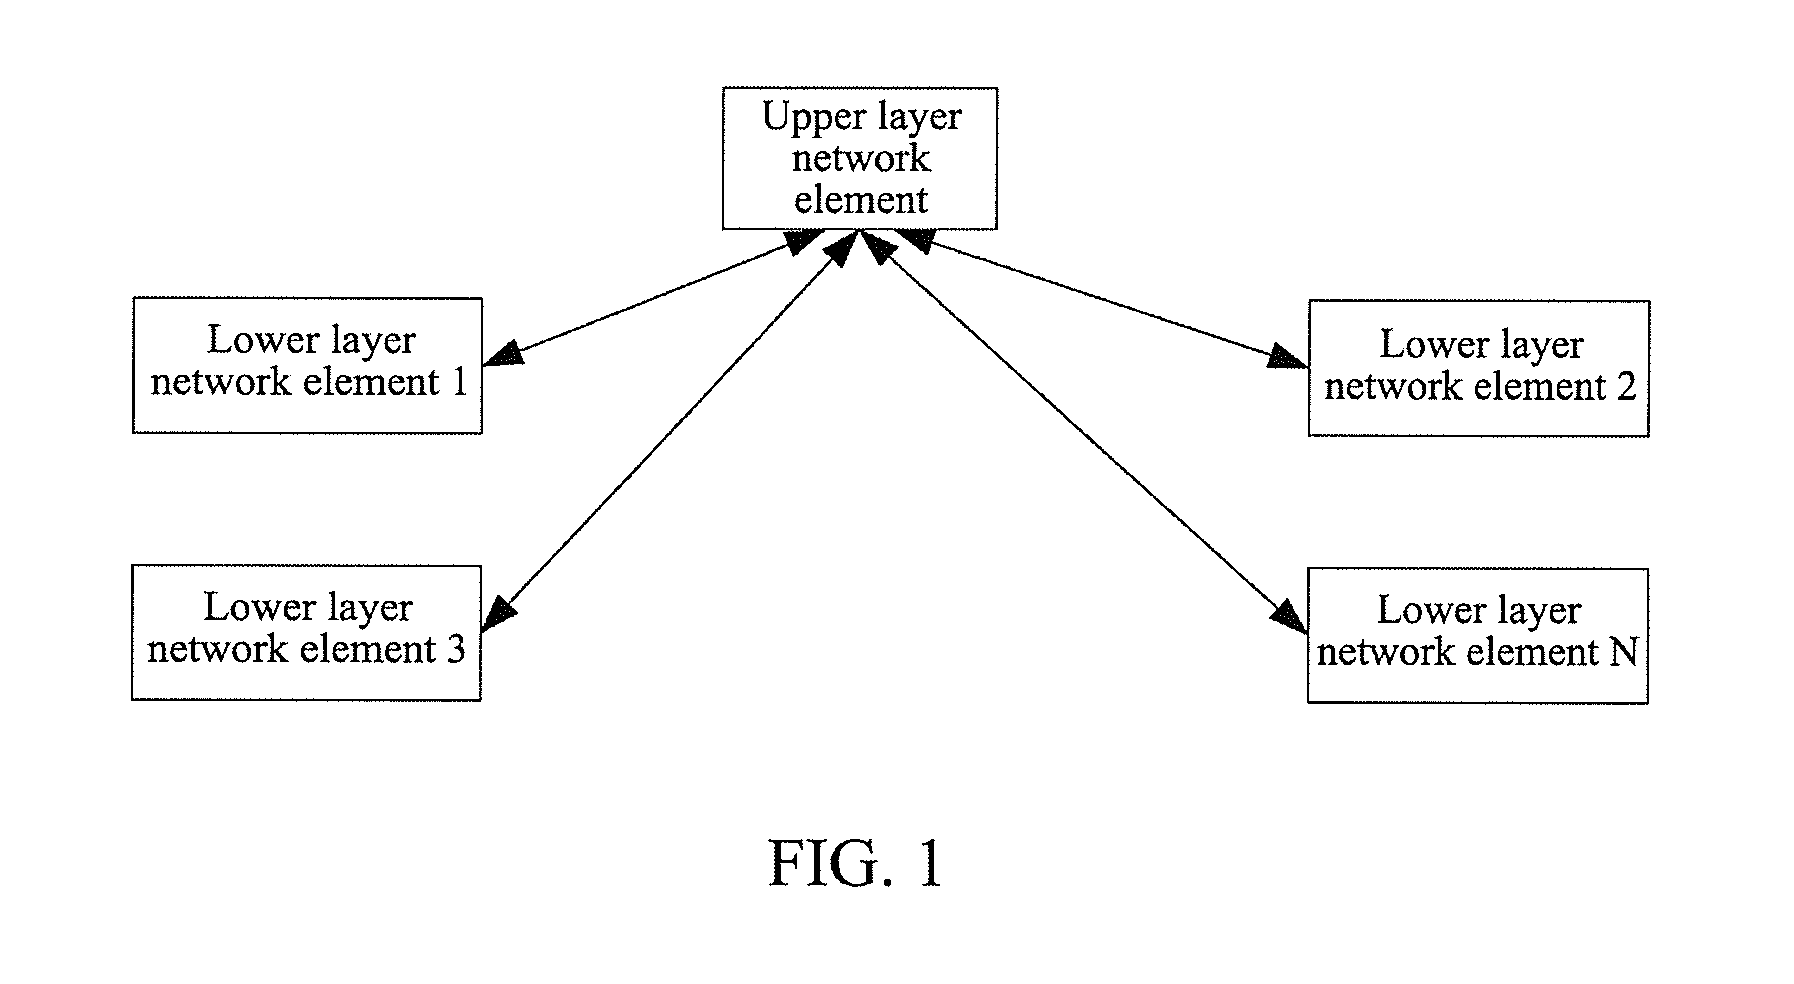 Method and apparatus for recovery processing of synchronously transmitted service data